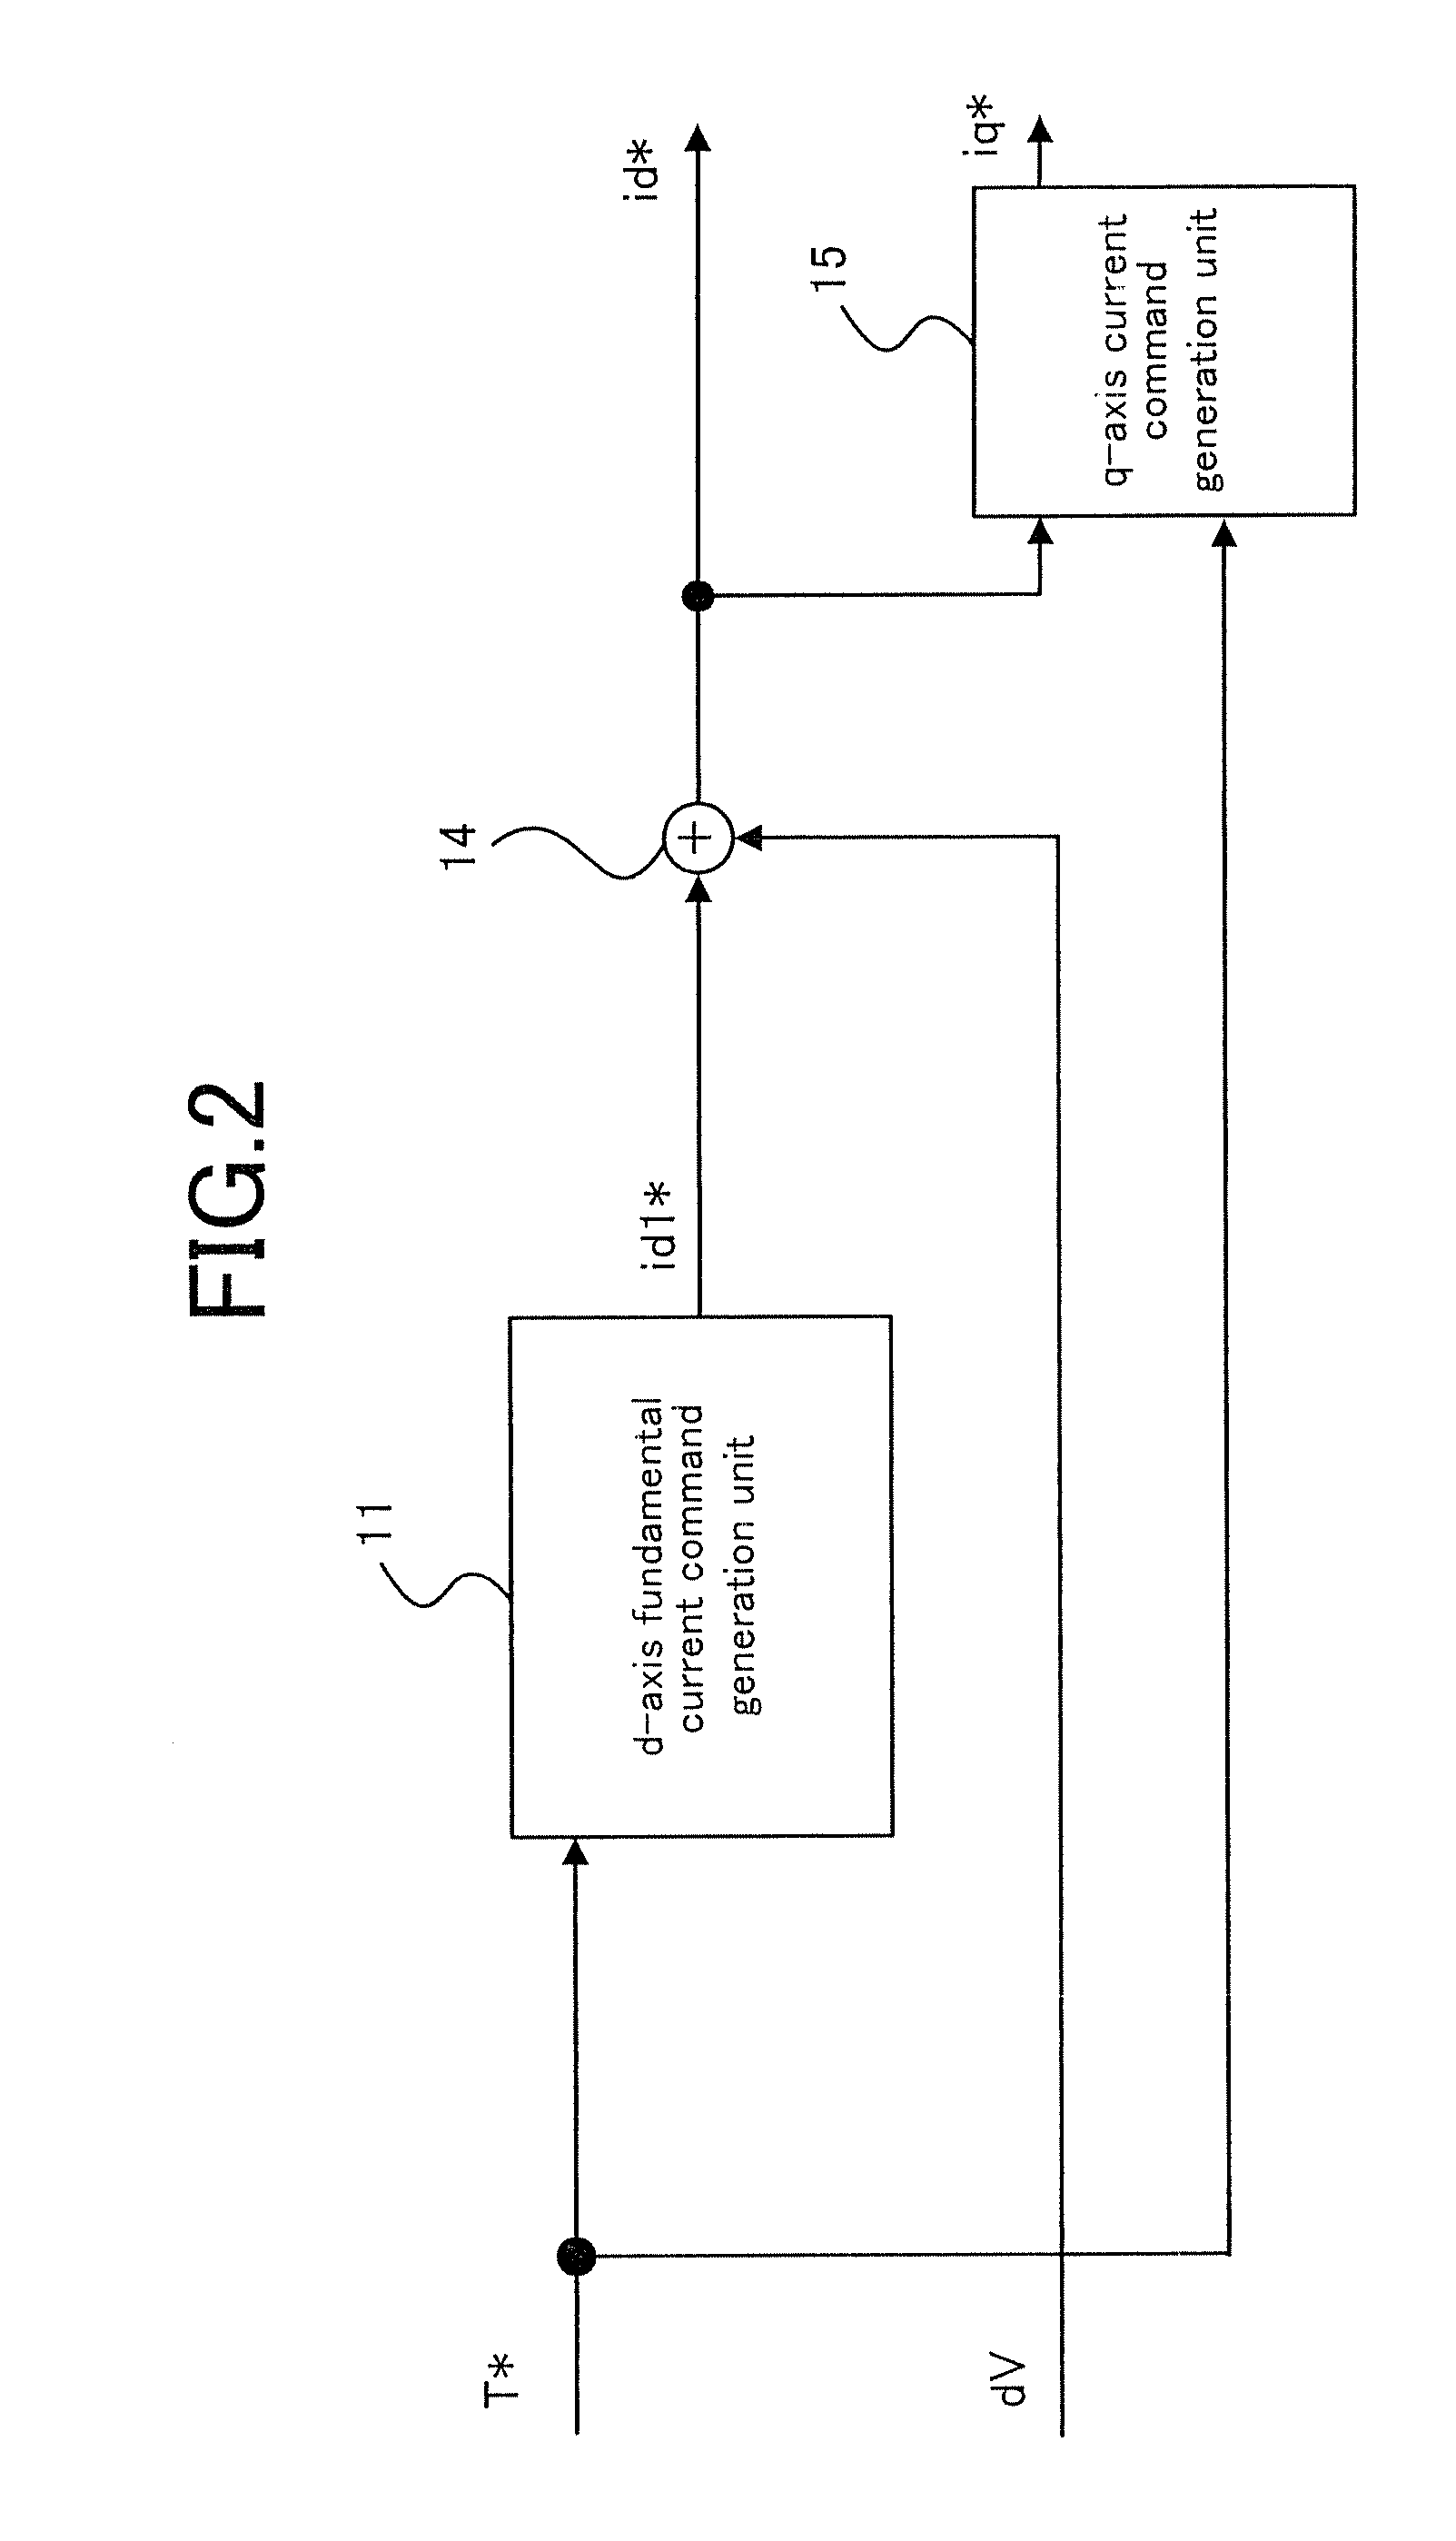 Vector controller for permanent-magnet synchronous electric motor